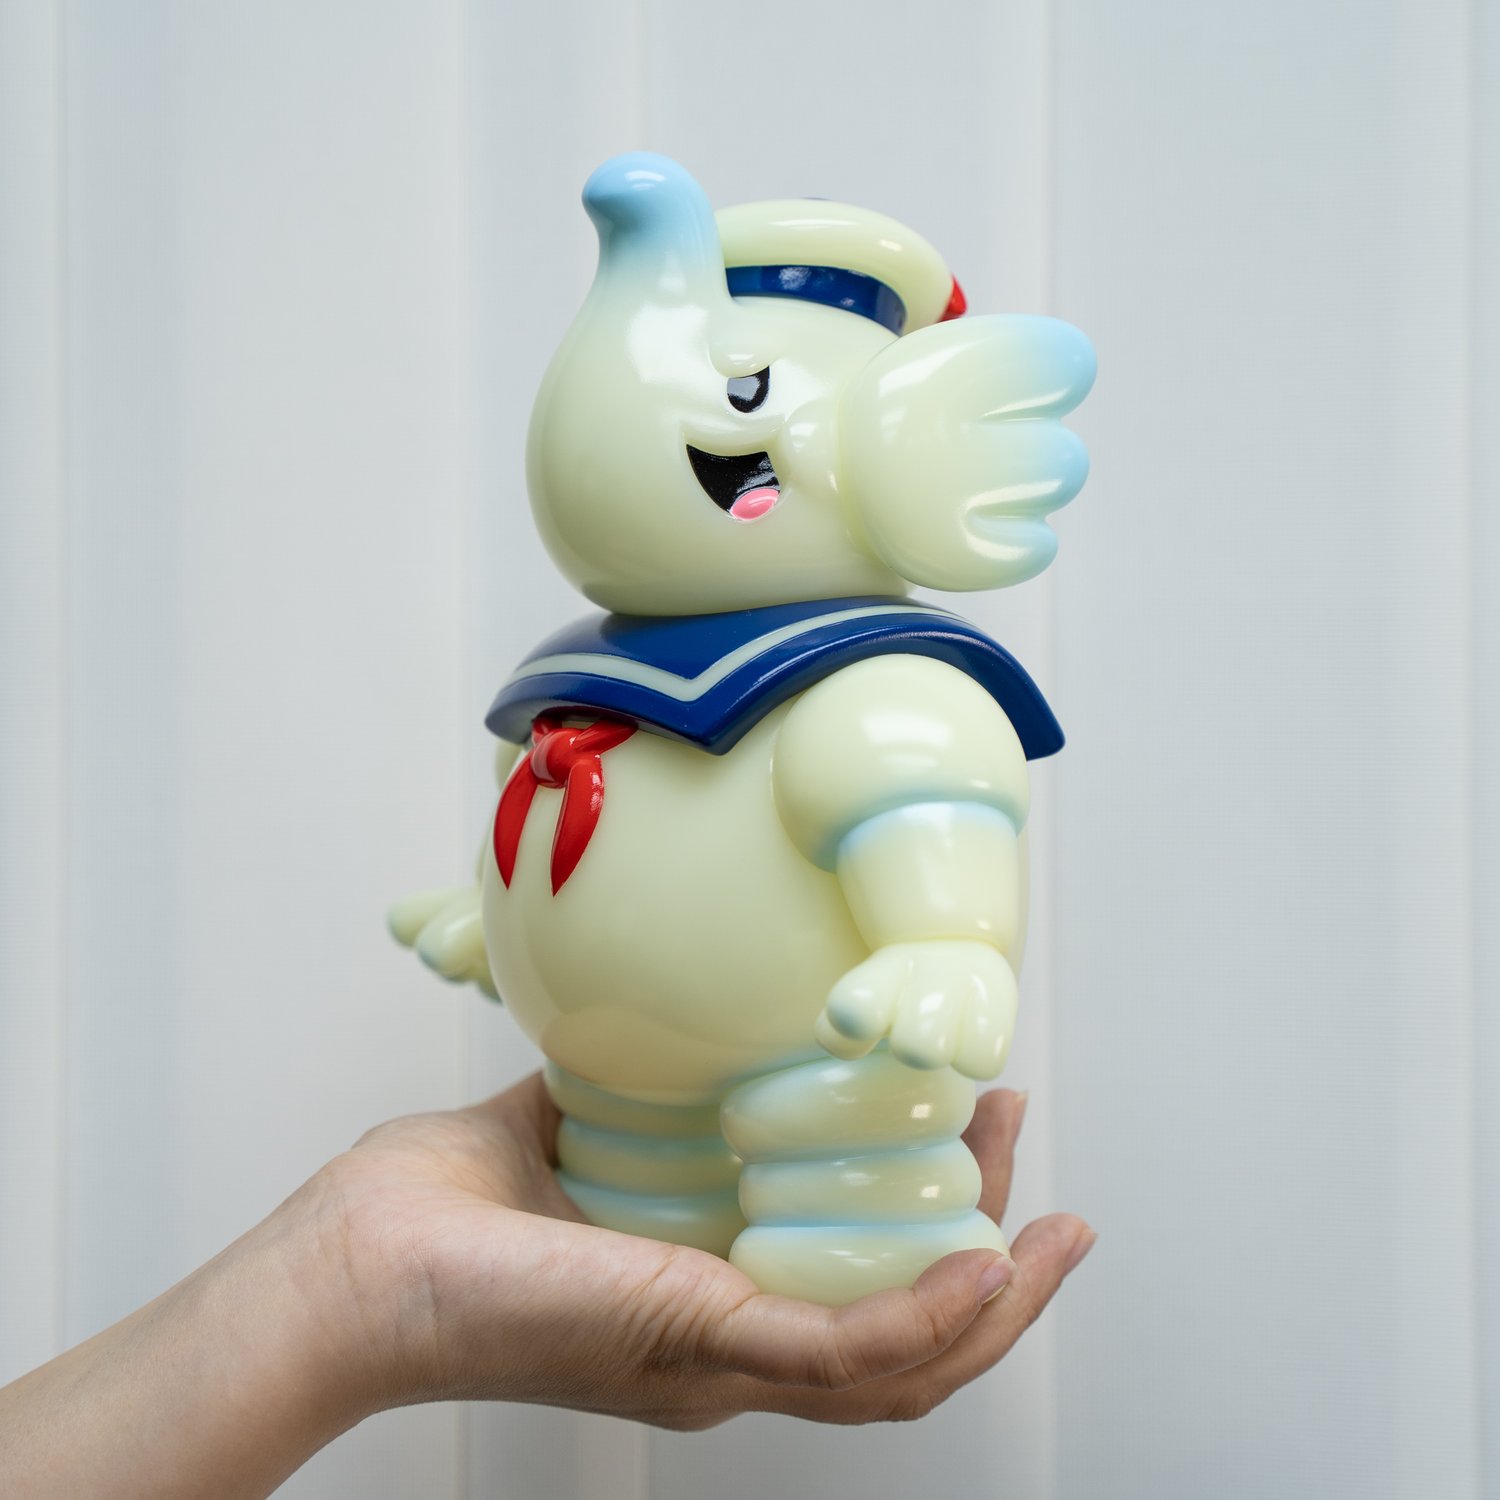 Image of STAY-PUFT MARSHMALLOW ELFIE GLOW EDITION